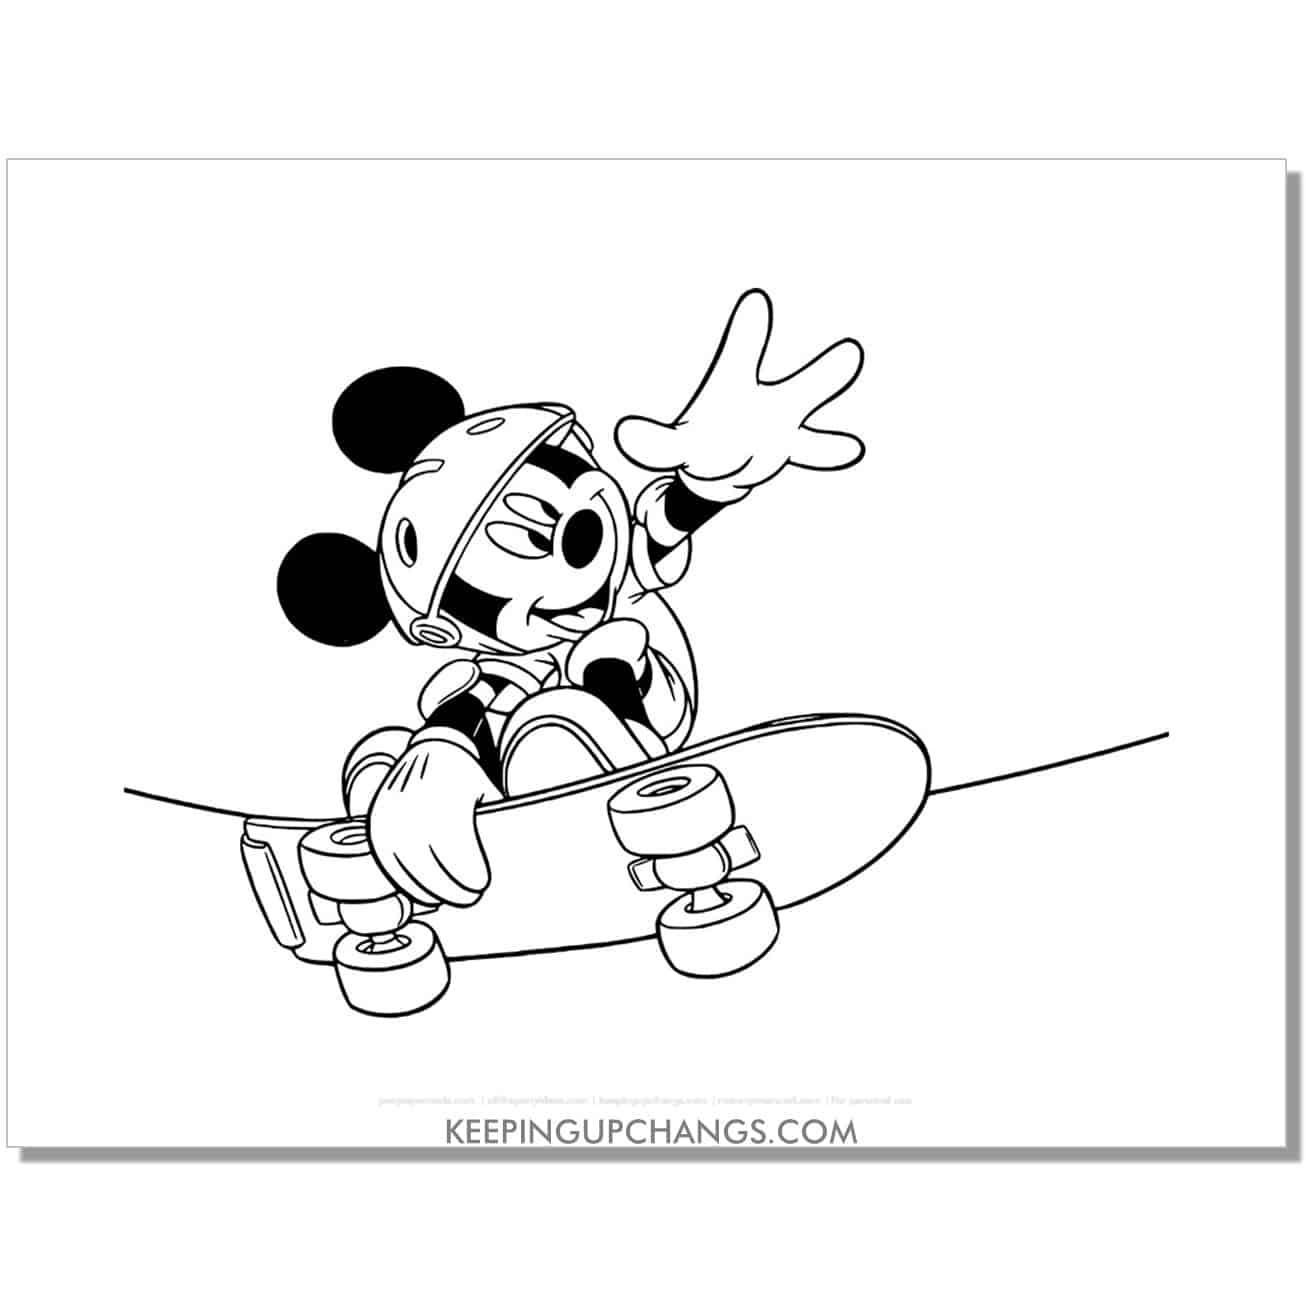 free mickey mouse skaeboarding coloring page, sheet.